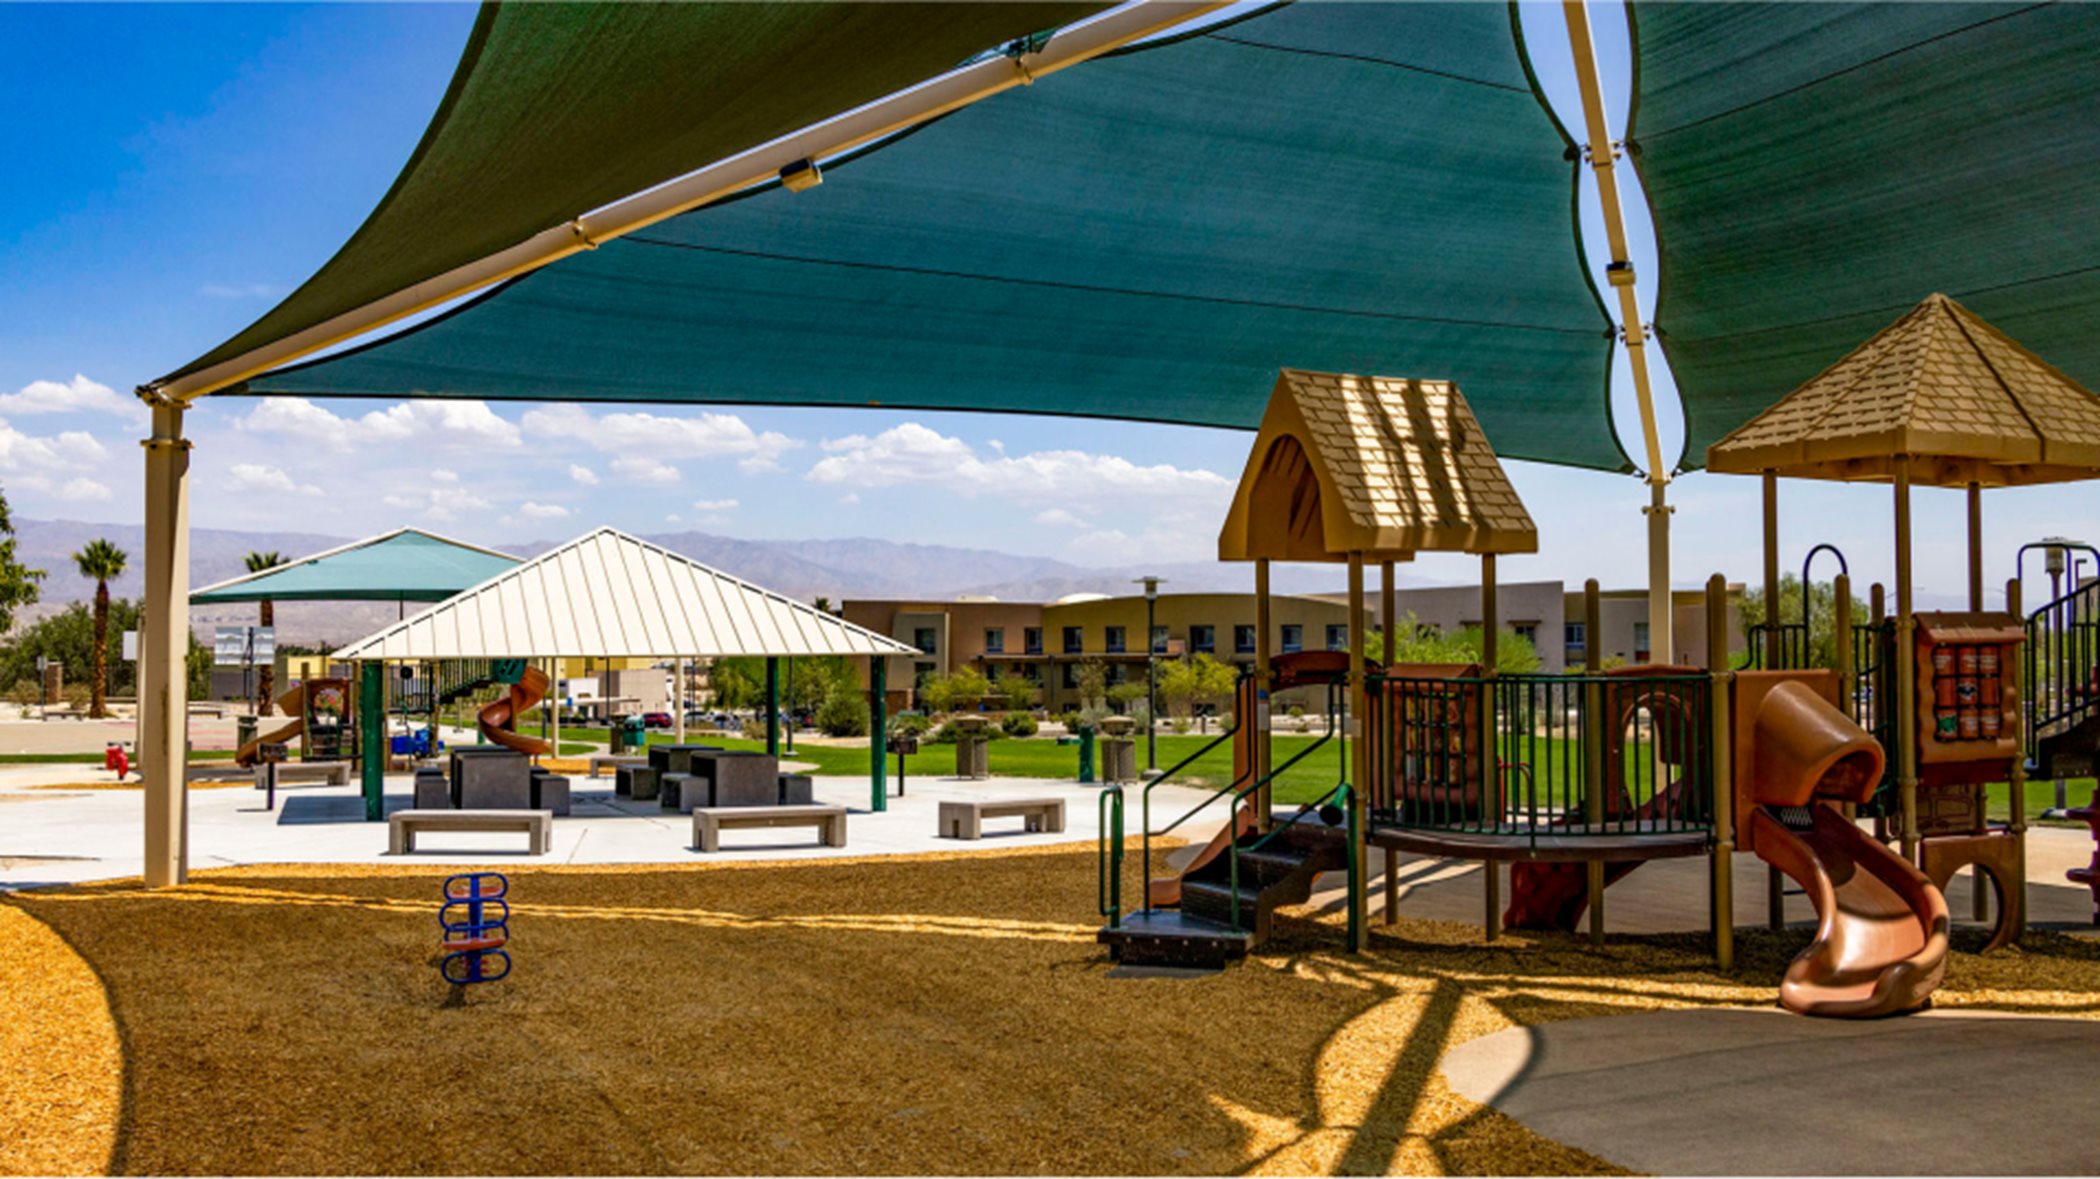 shaded playground with picnic available